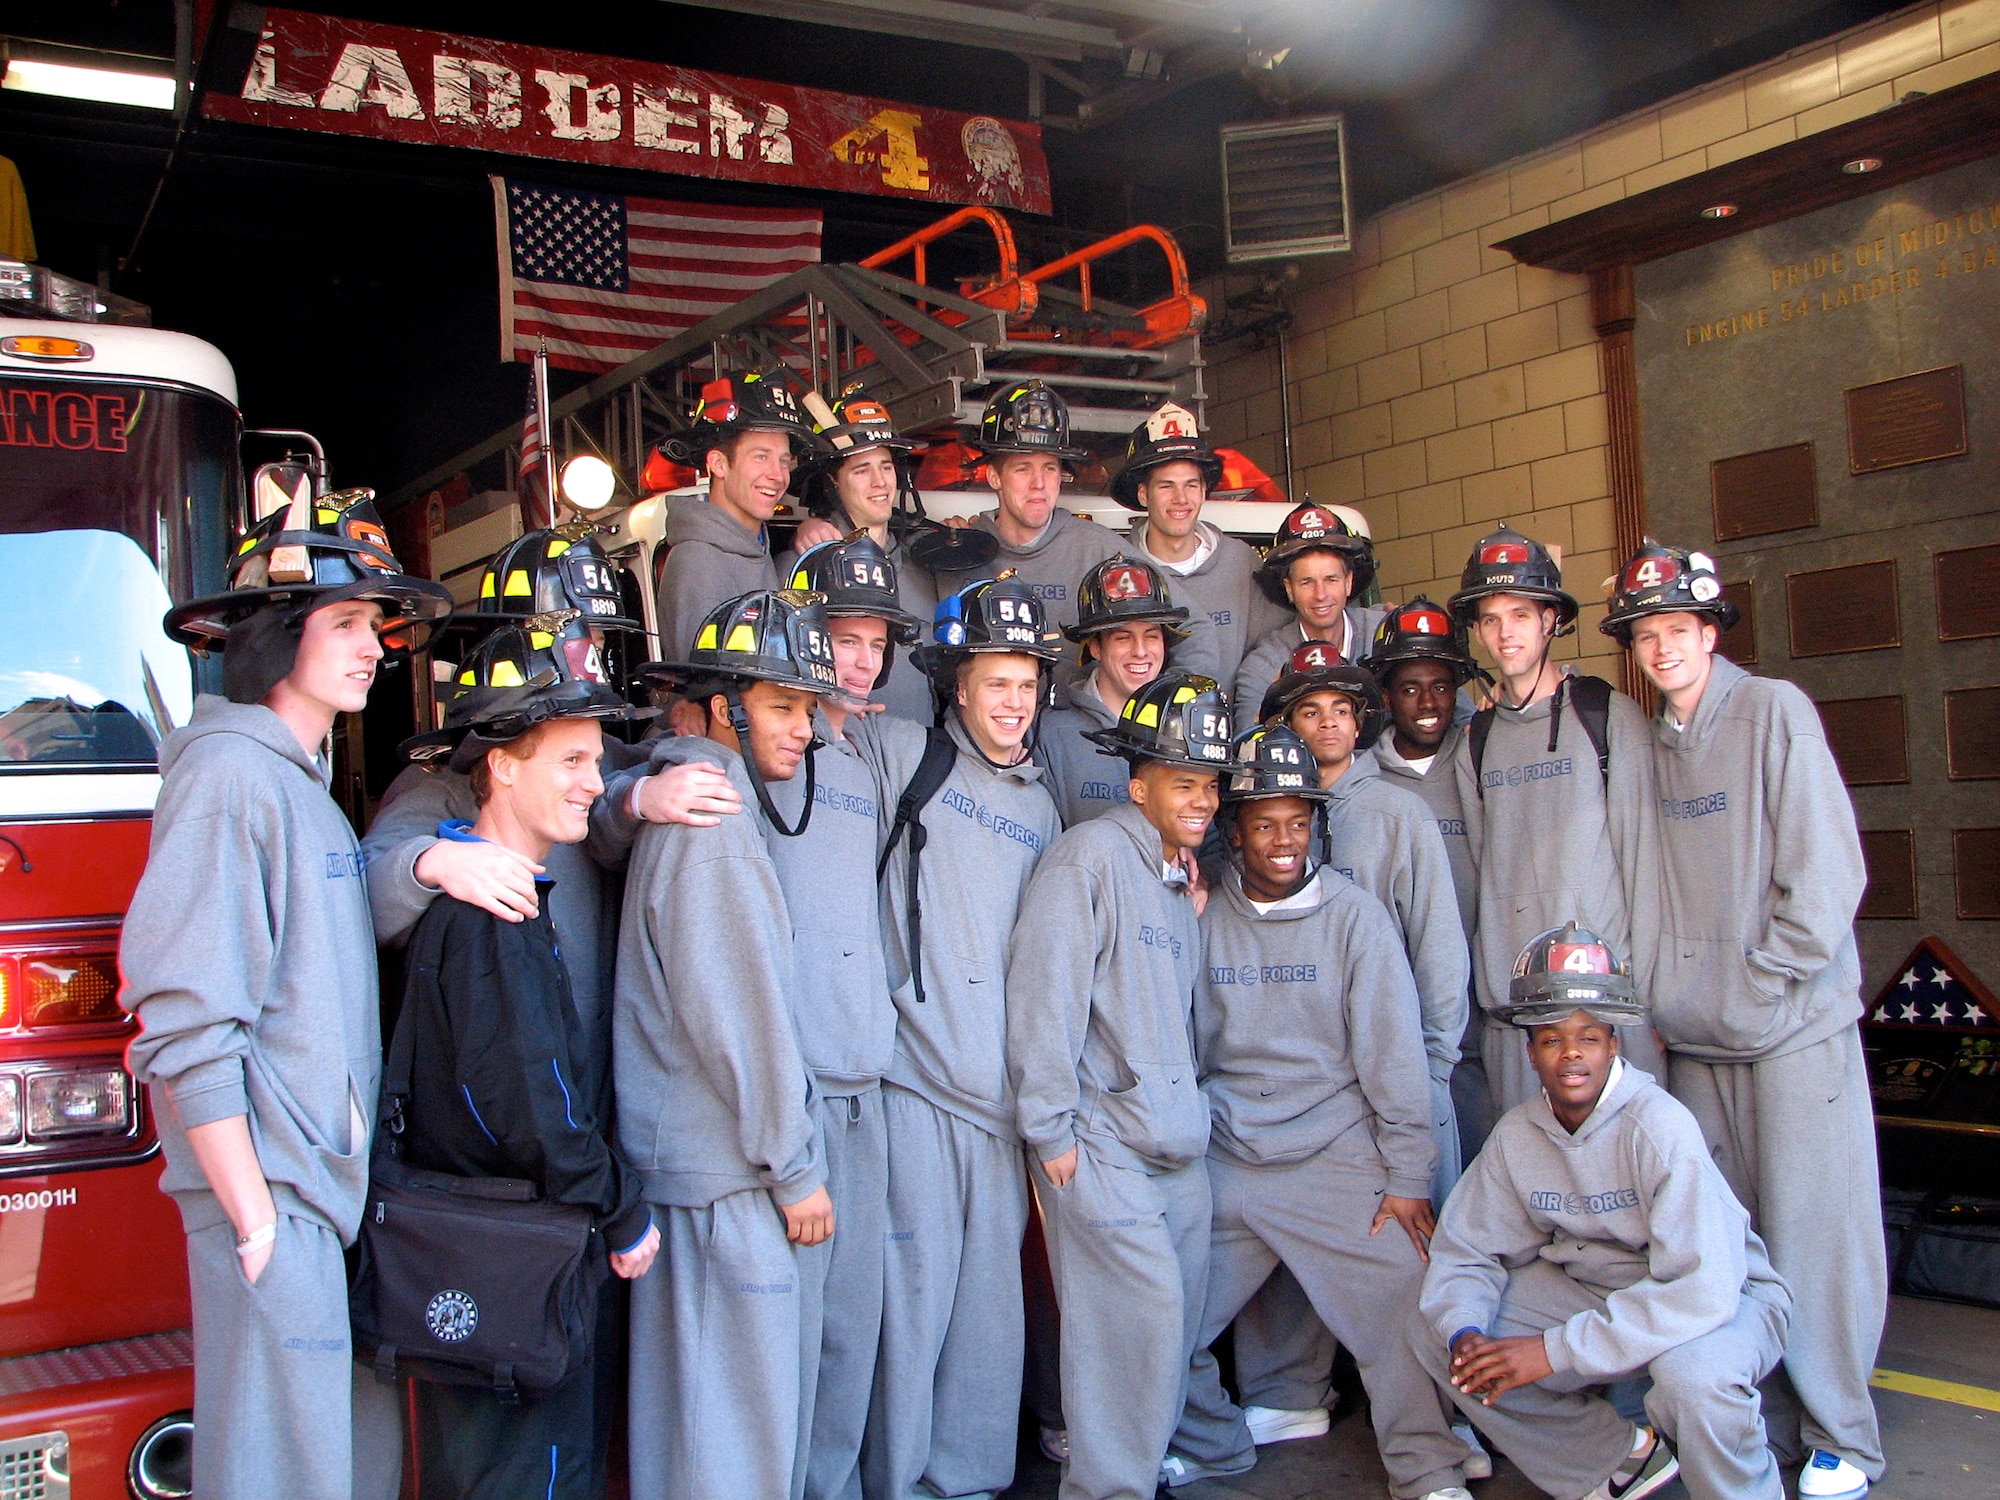 The U.S. Air Force Academy men's basketball team poses for a photo March 25 during a tour of the Engine 54 fire station in New York City. The team is playing in the National Invitation Tournament semifinals March 27 against the Clemson Tigers in Madison Square Garden. (U.S. Air Force photo/Staff Sgt. Steve Grever) 